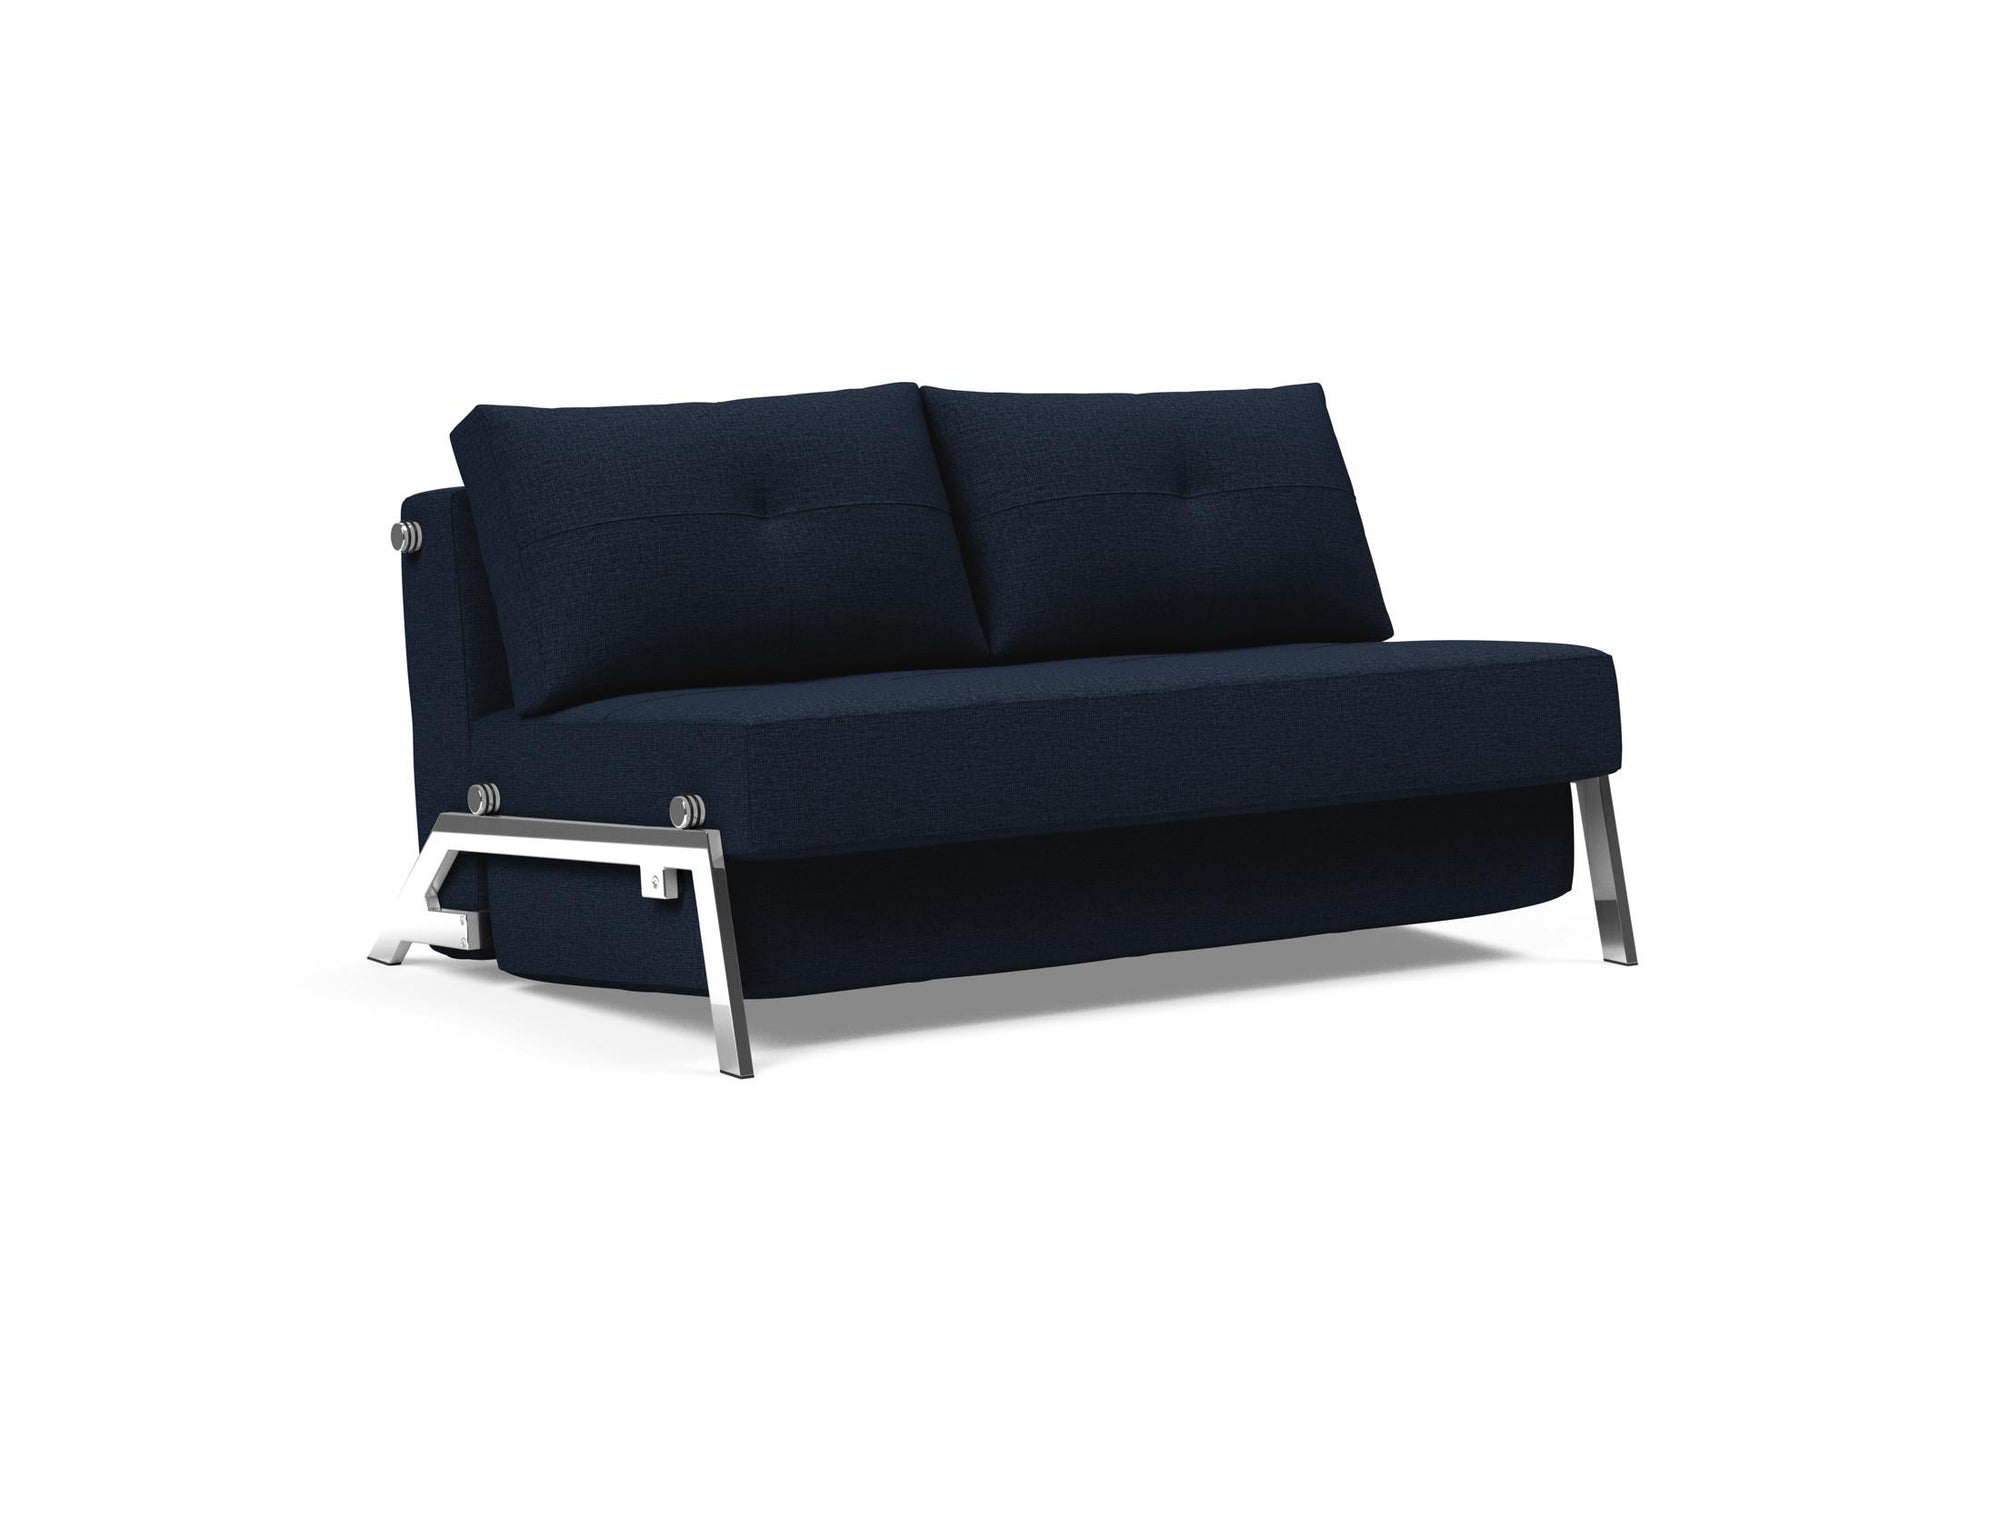 CUBED Chrome Sofabed 140CM